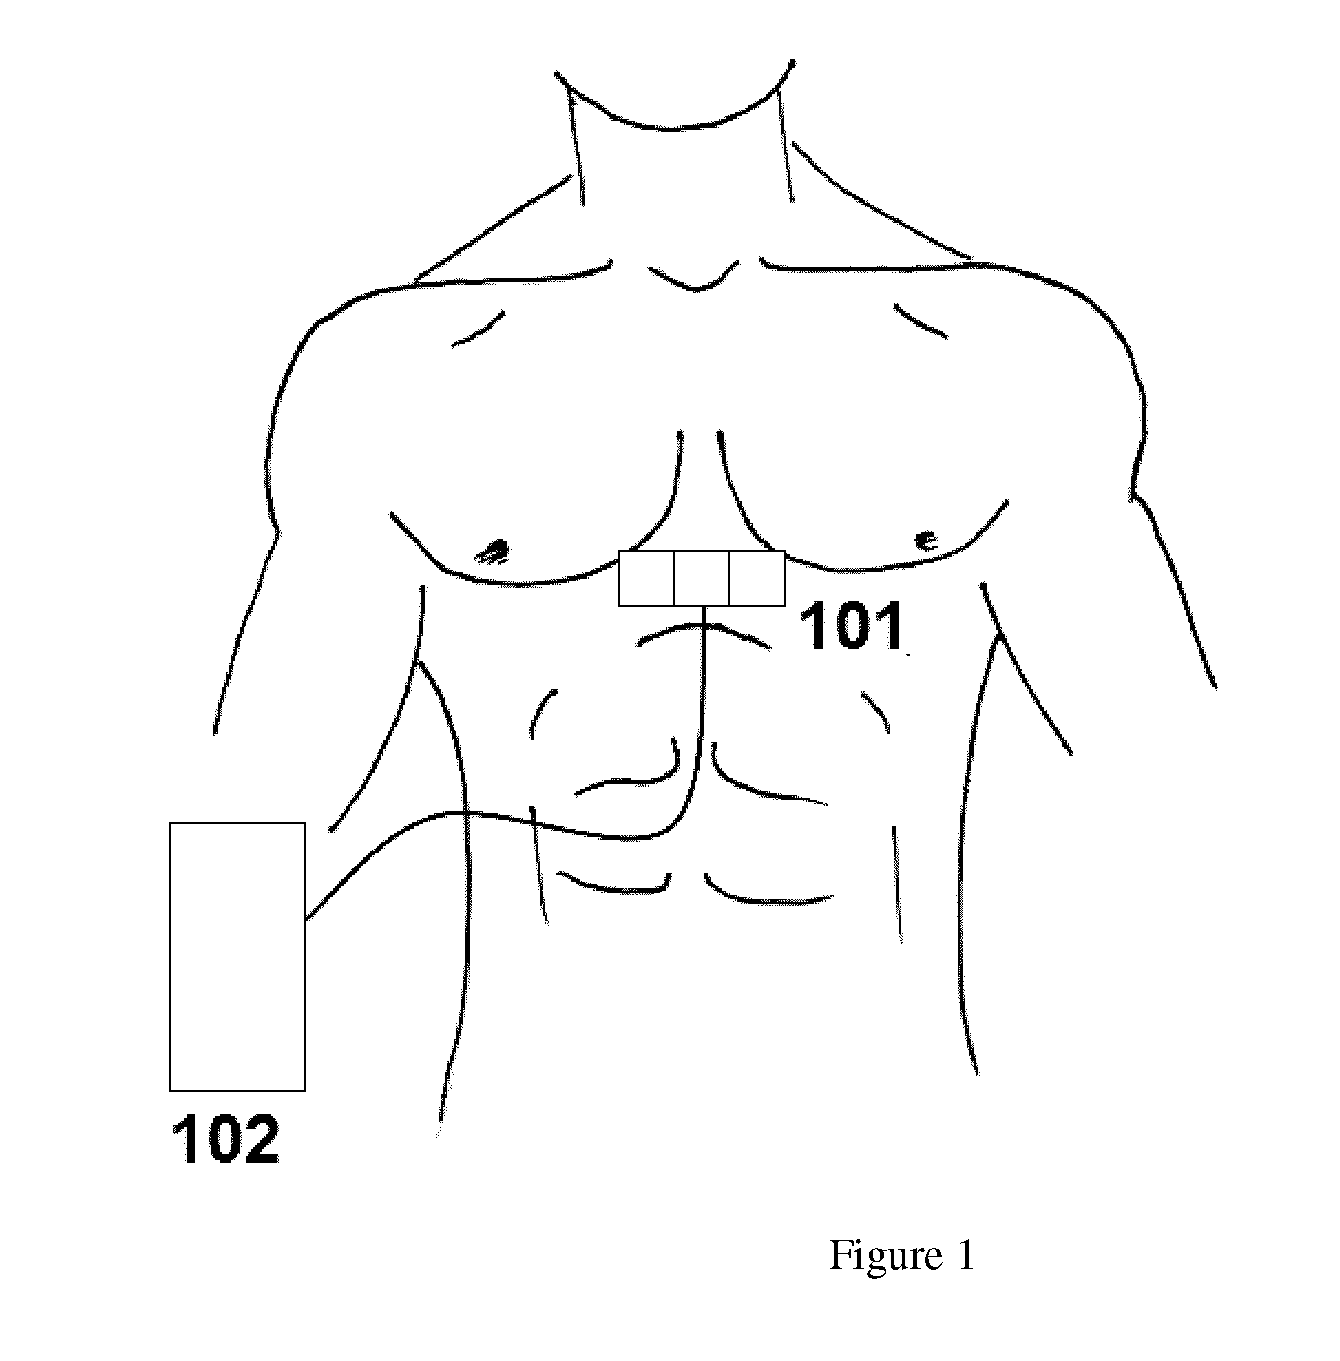 Method and apparatus for estimating myocardial contractility using precordial vibration